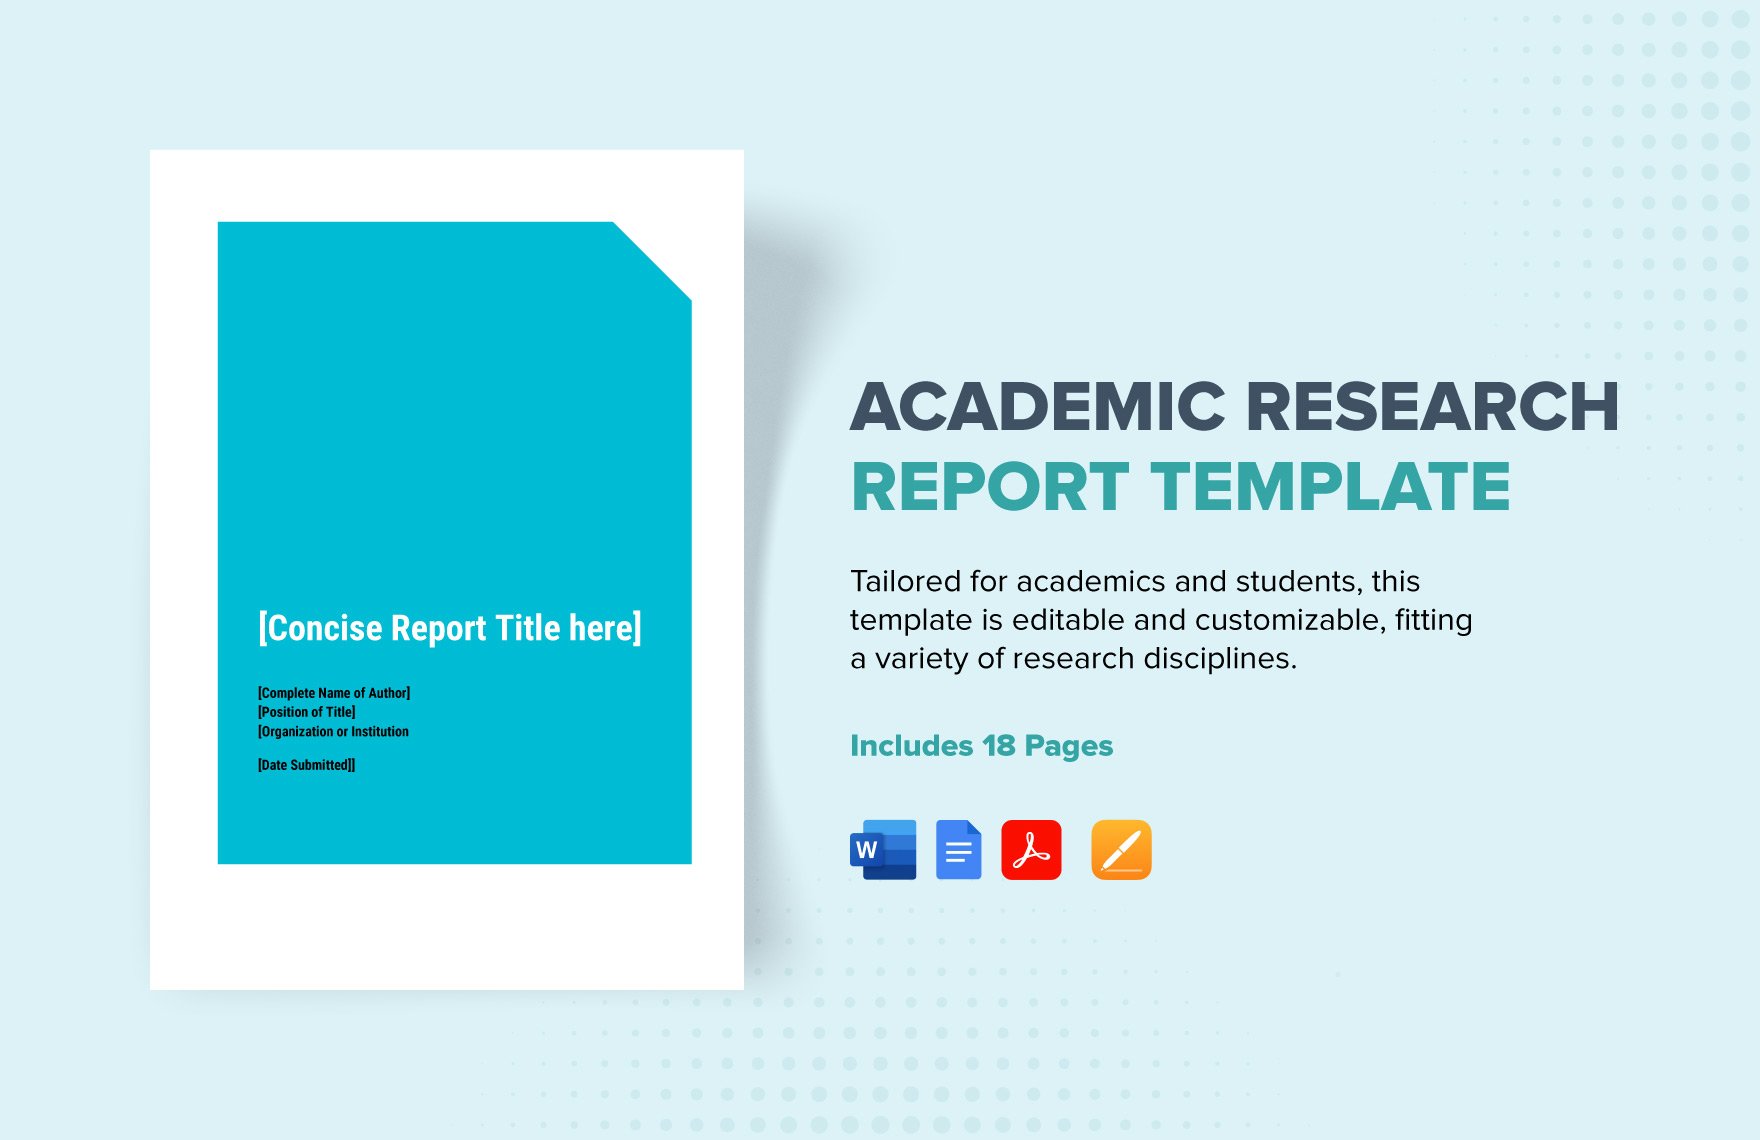 Academic Research Report Template in Word, Google Docs, PDF, Apple Pages